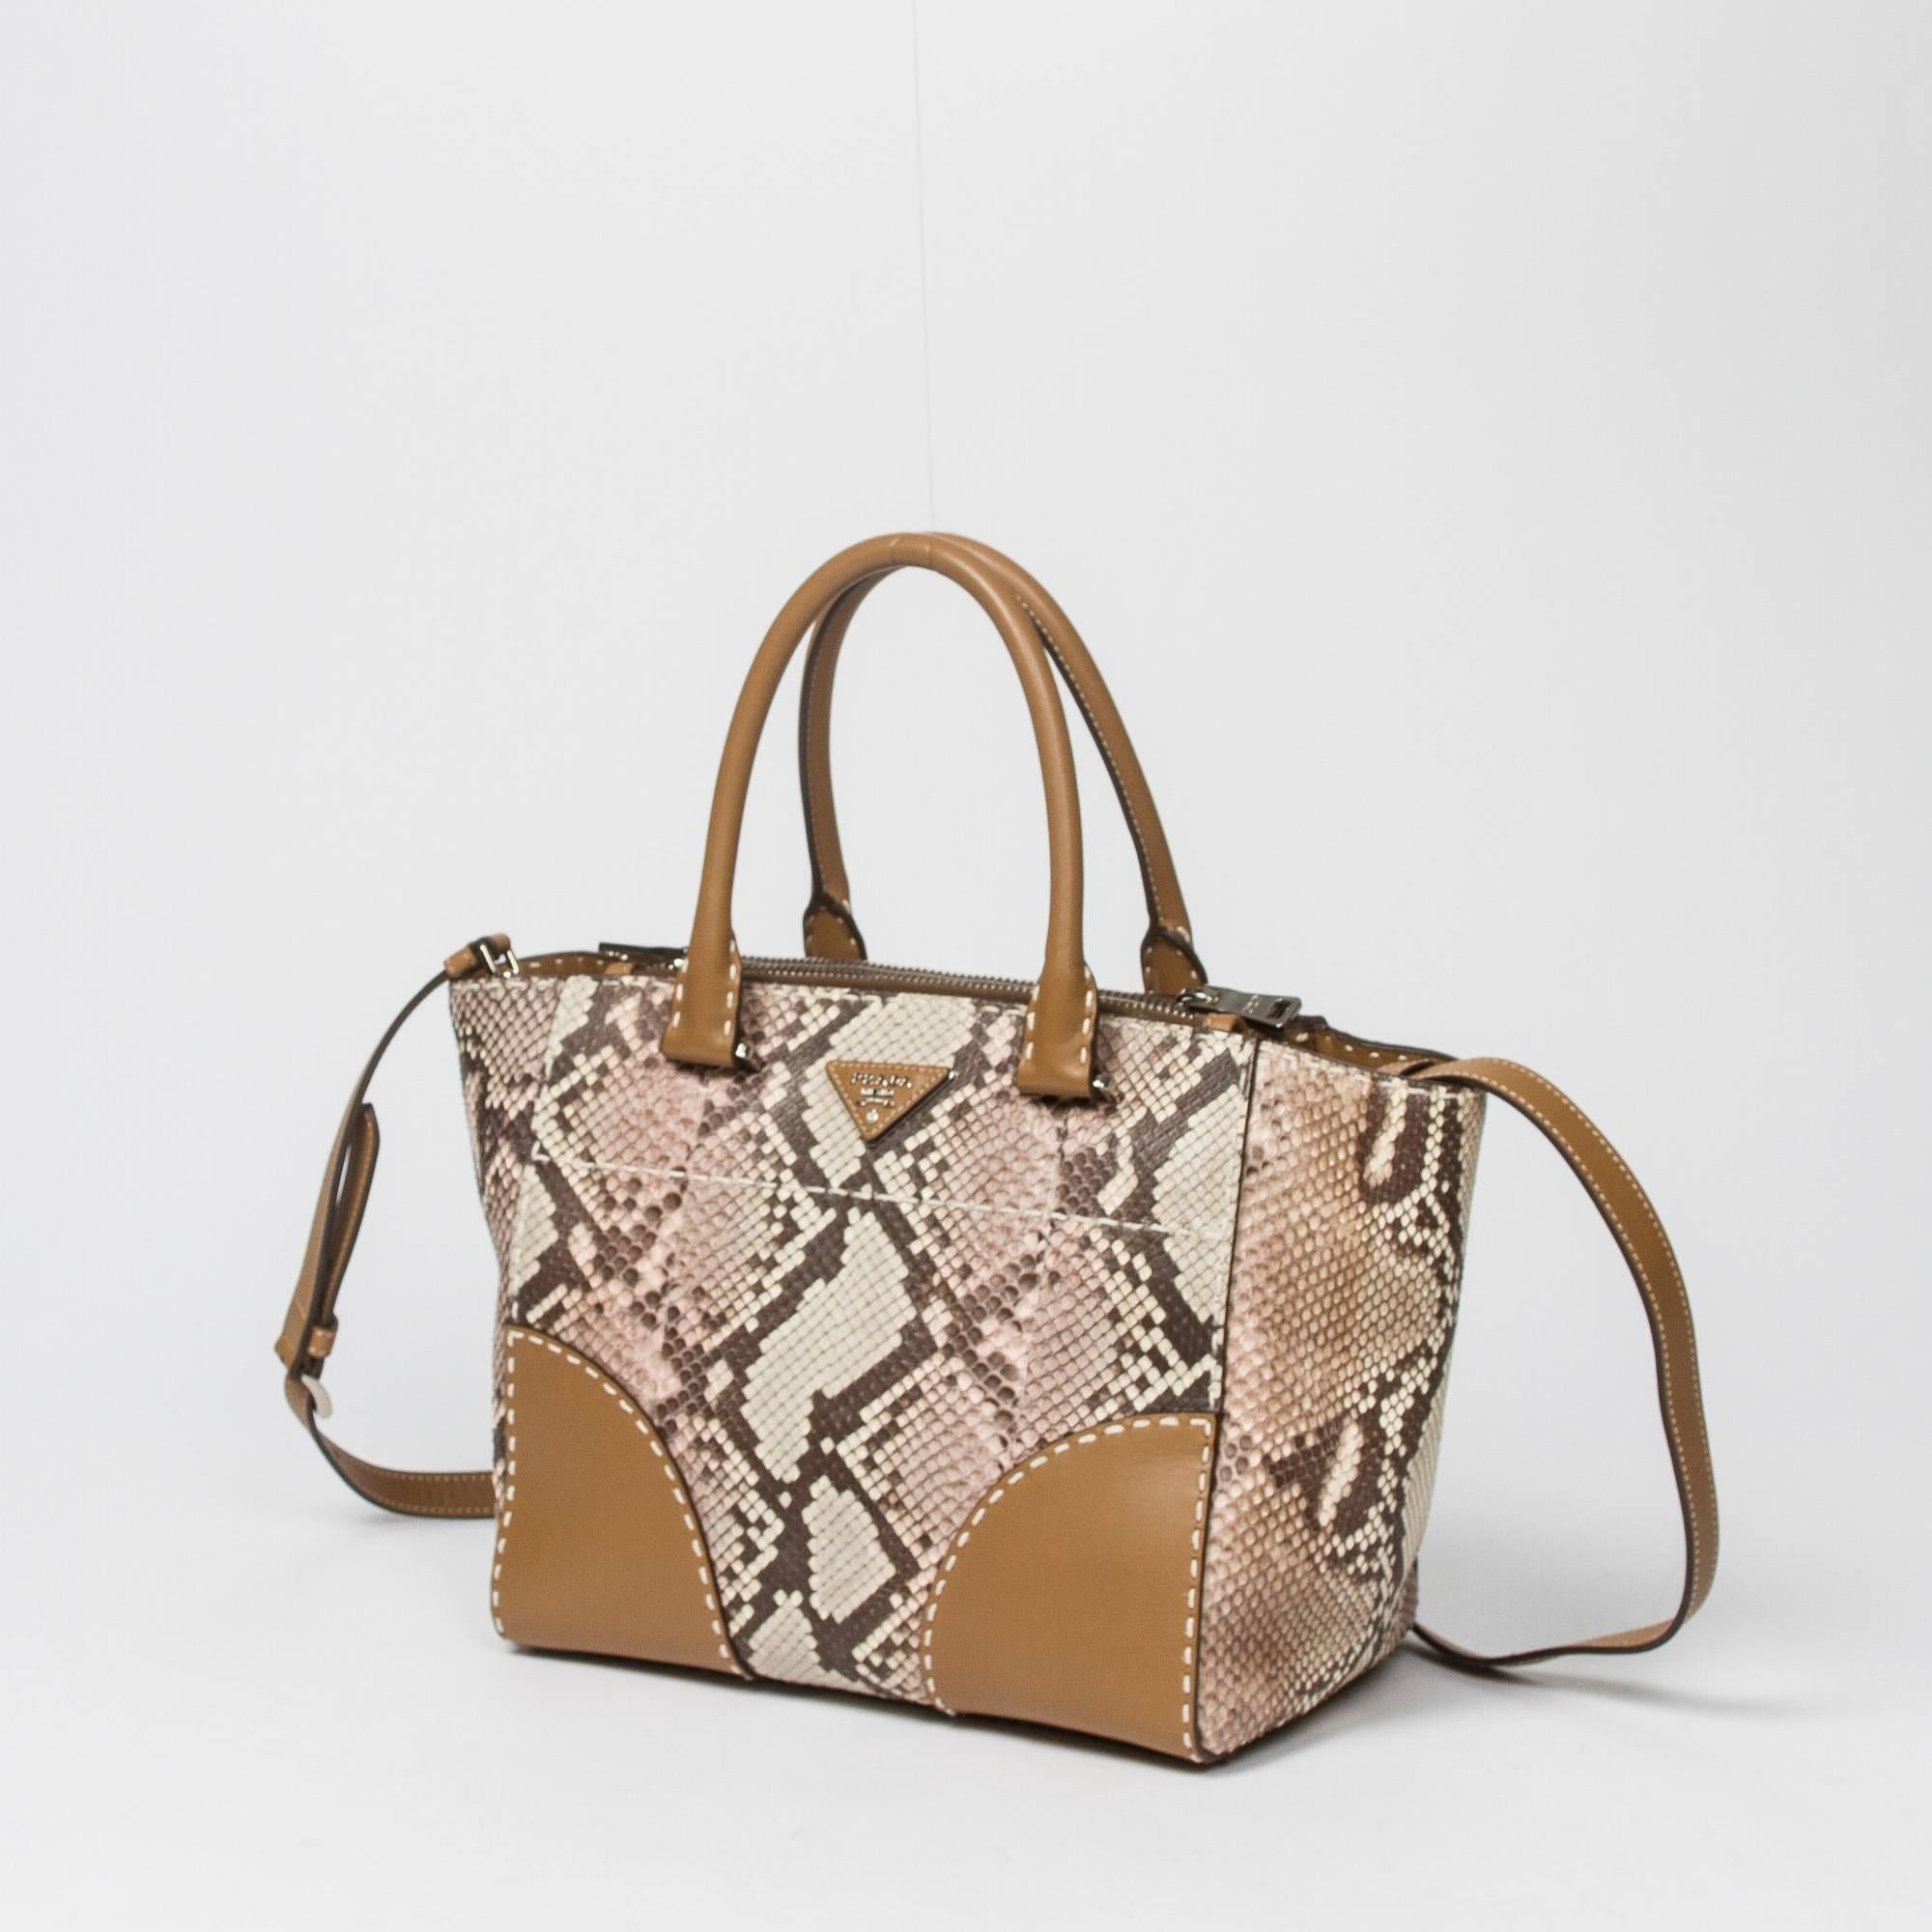 Tote in Beige/Ivory/Brown python leather with light brown leather handles, silver tone hardware. Lined interior very clean. Dustbag included. Production code LN 08650. Very light signs of use. The bag has kept its shape very well. Clean interior. In